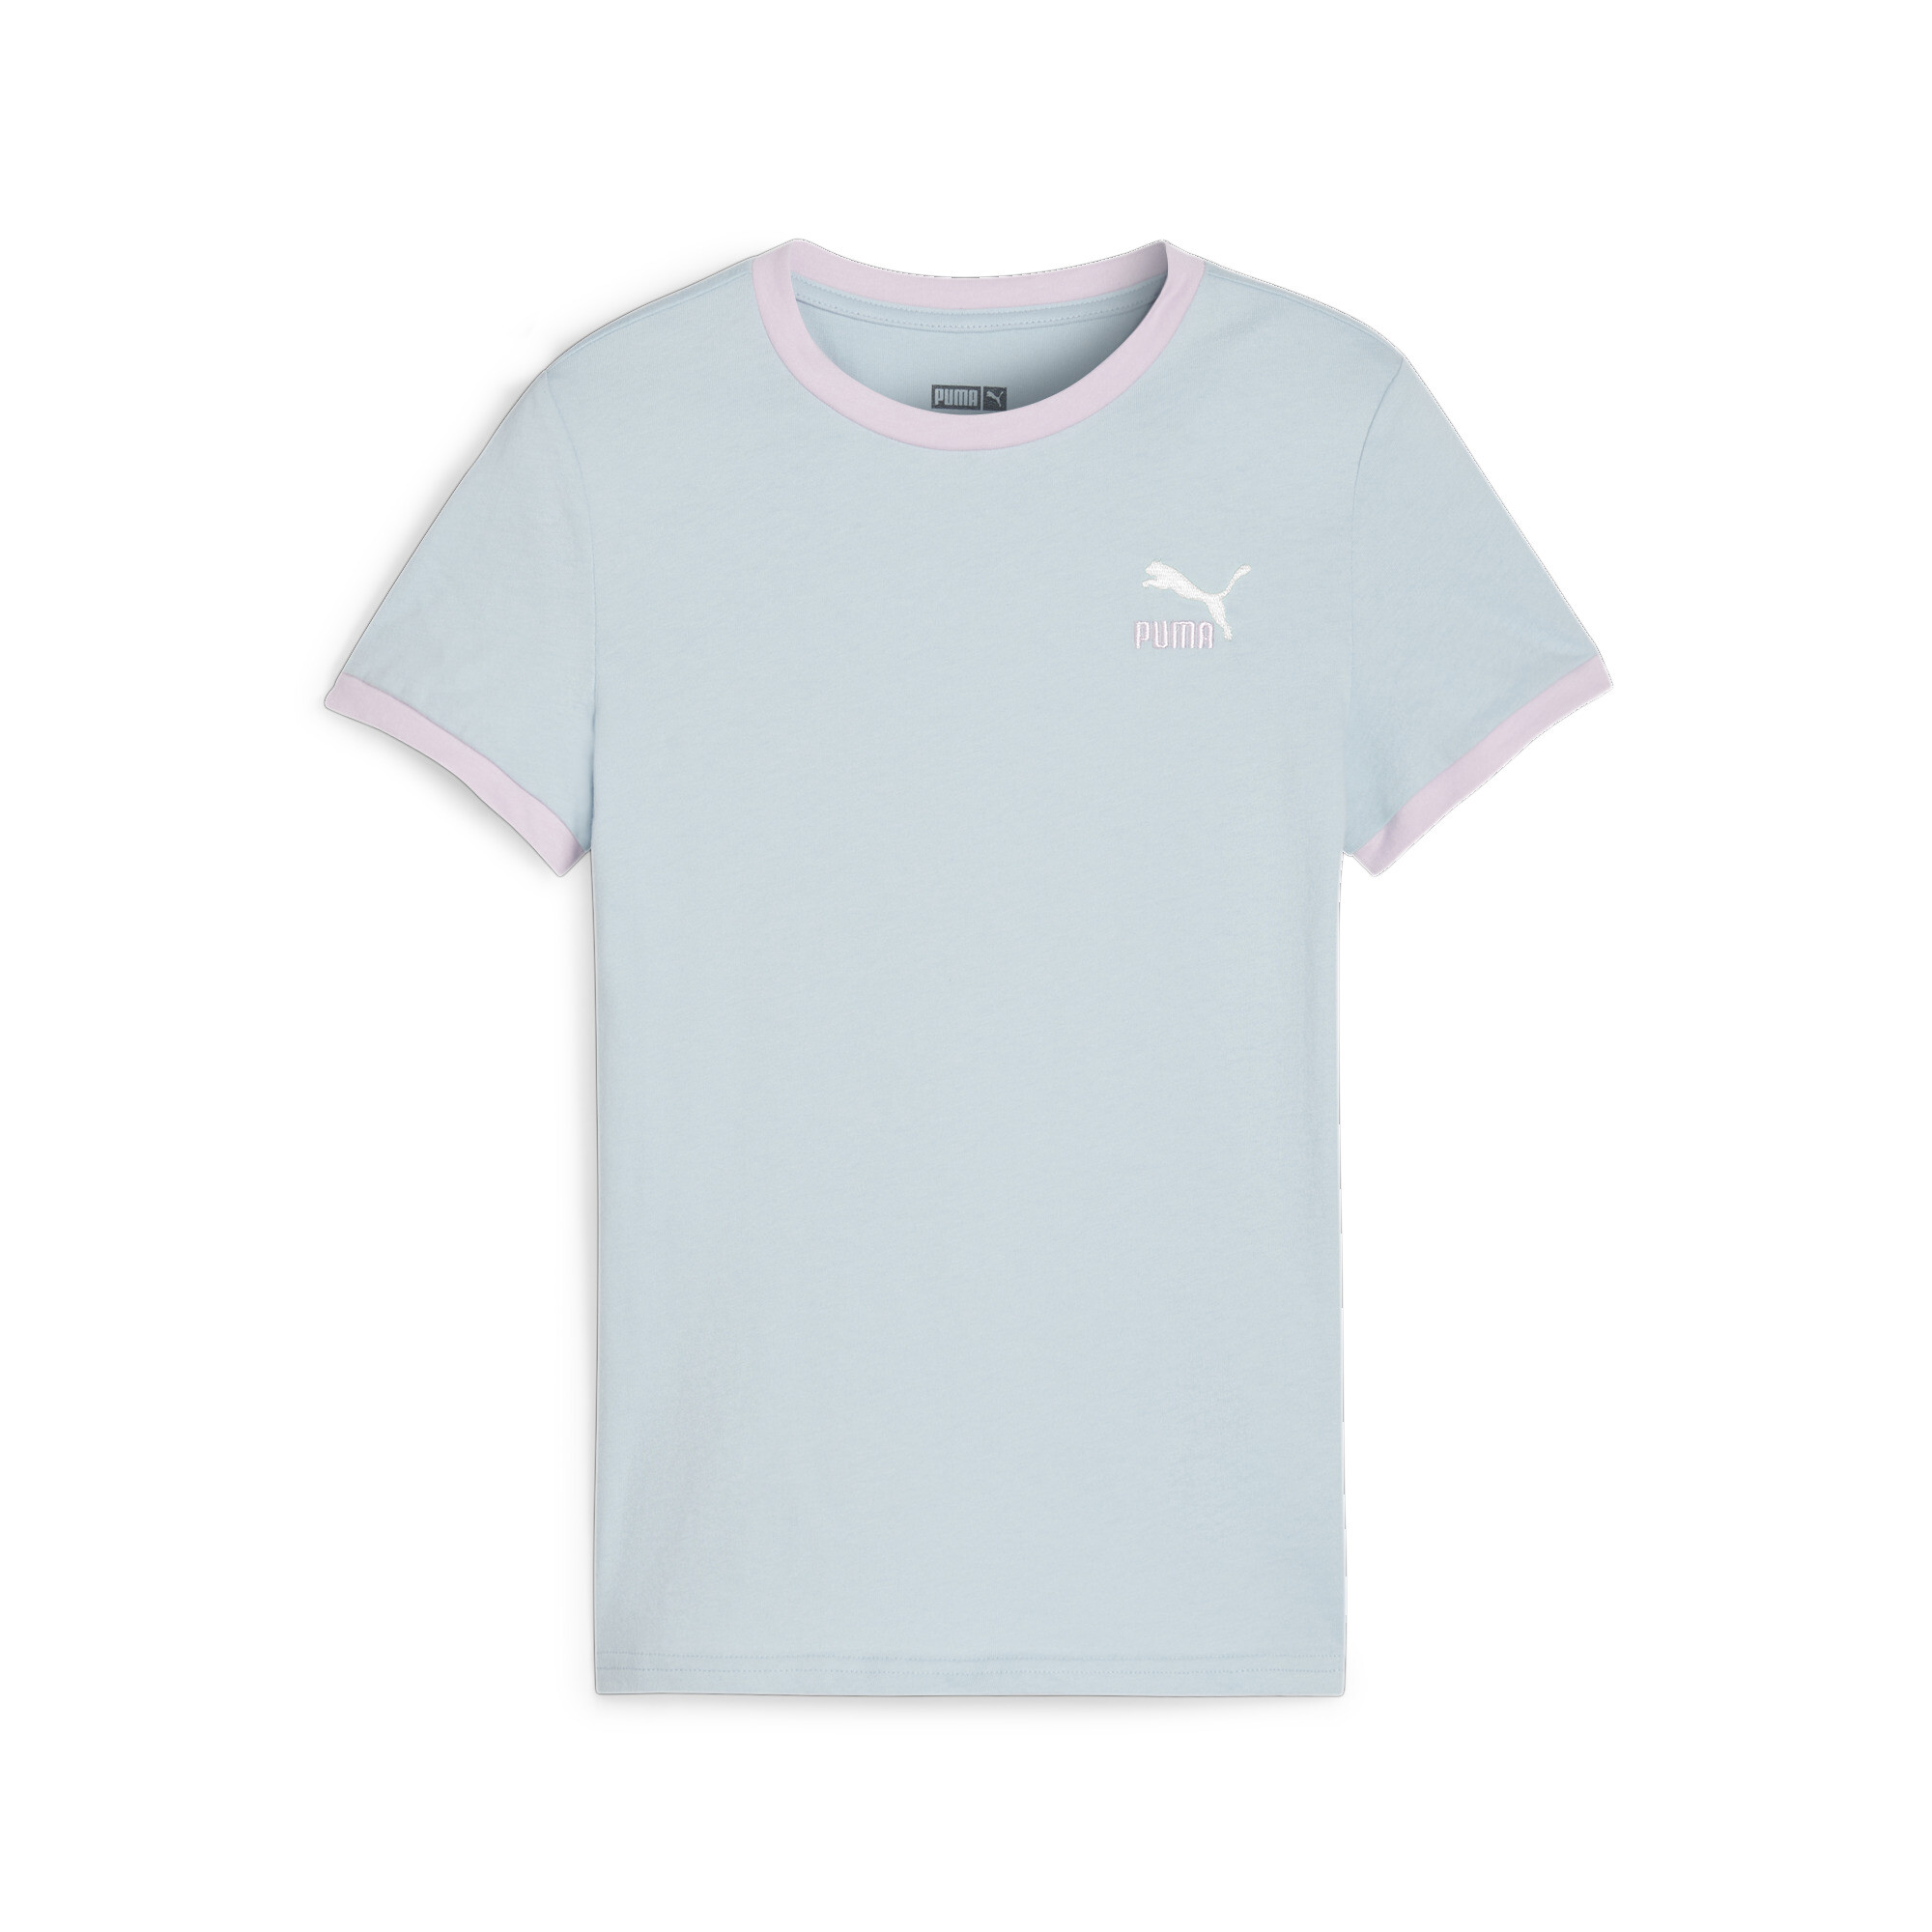 PUMA CLASSICS Match Point T-Shirt In 80 - Blue, Size 13-14 Youth